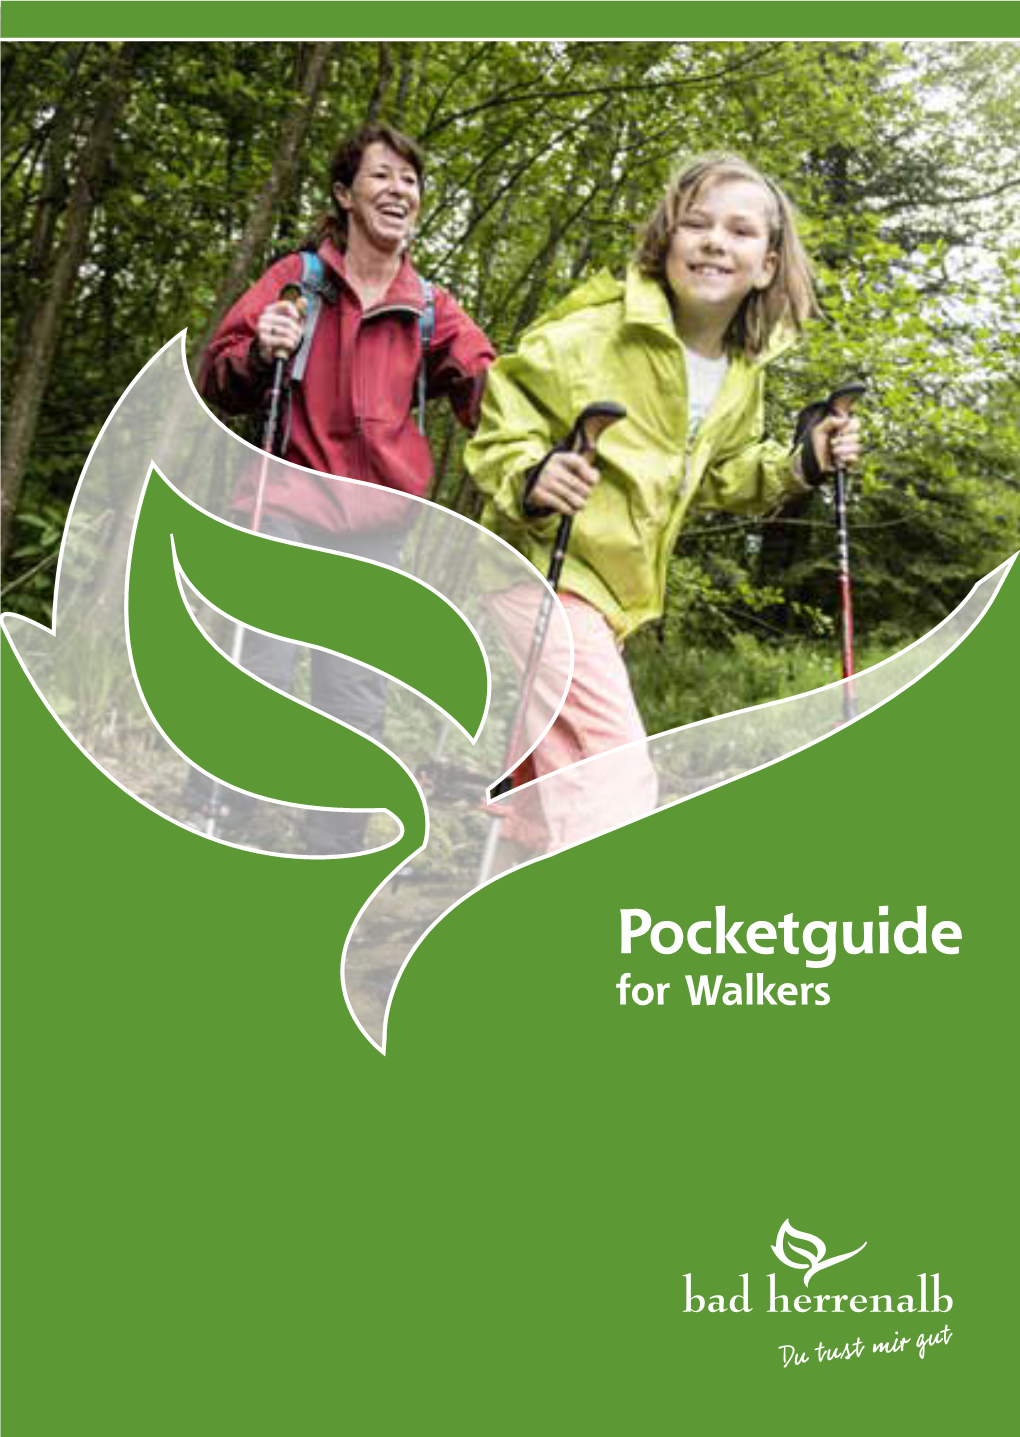 Pocketguide for Walkers Welcome to the Walking Paradise of Bad Herrenalb!